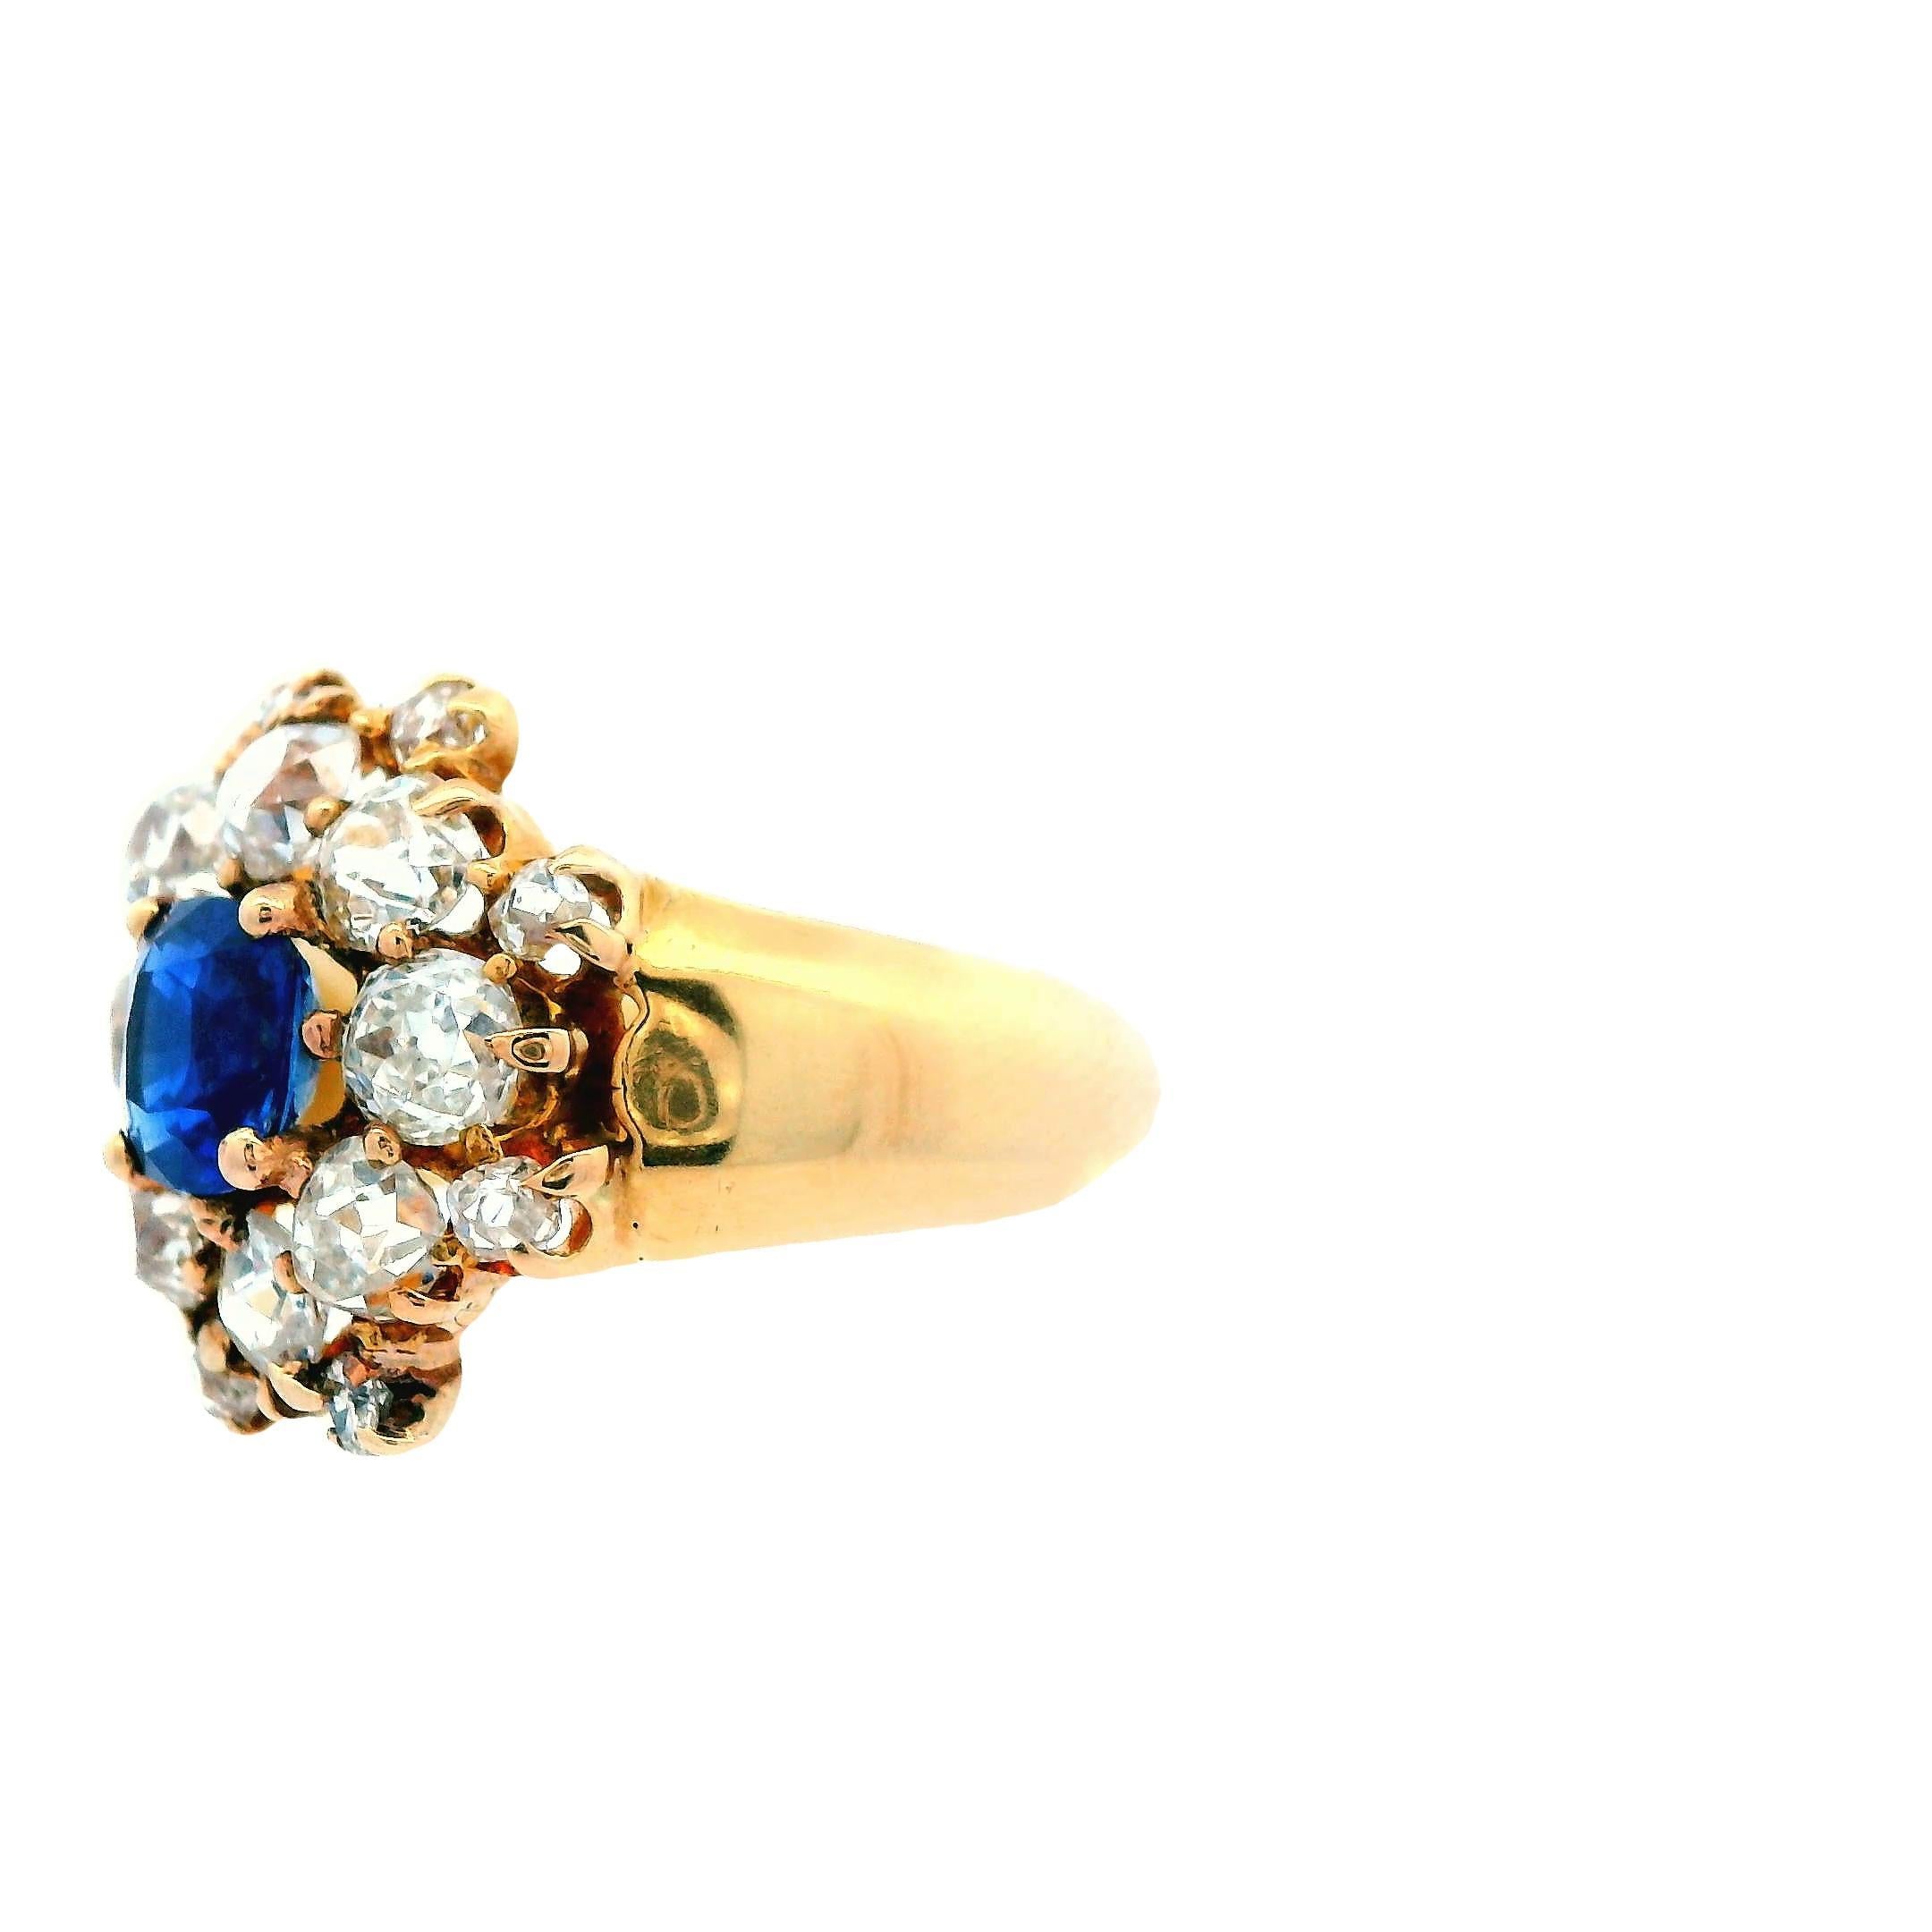 1890 Victorian 18K Yellow Gold Sapphire and Diamond Ring For Sale 2